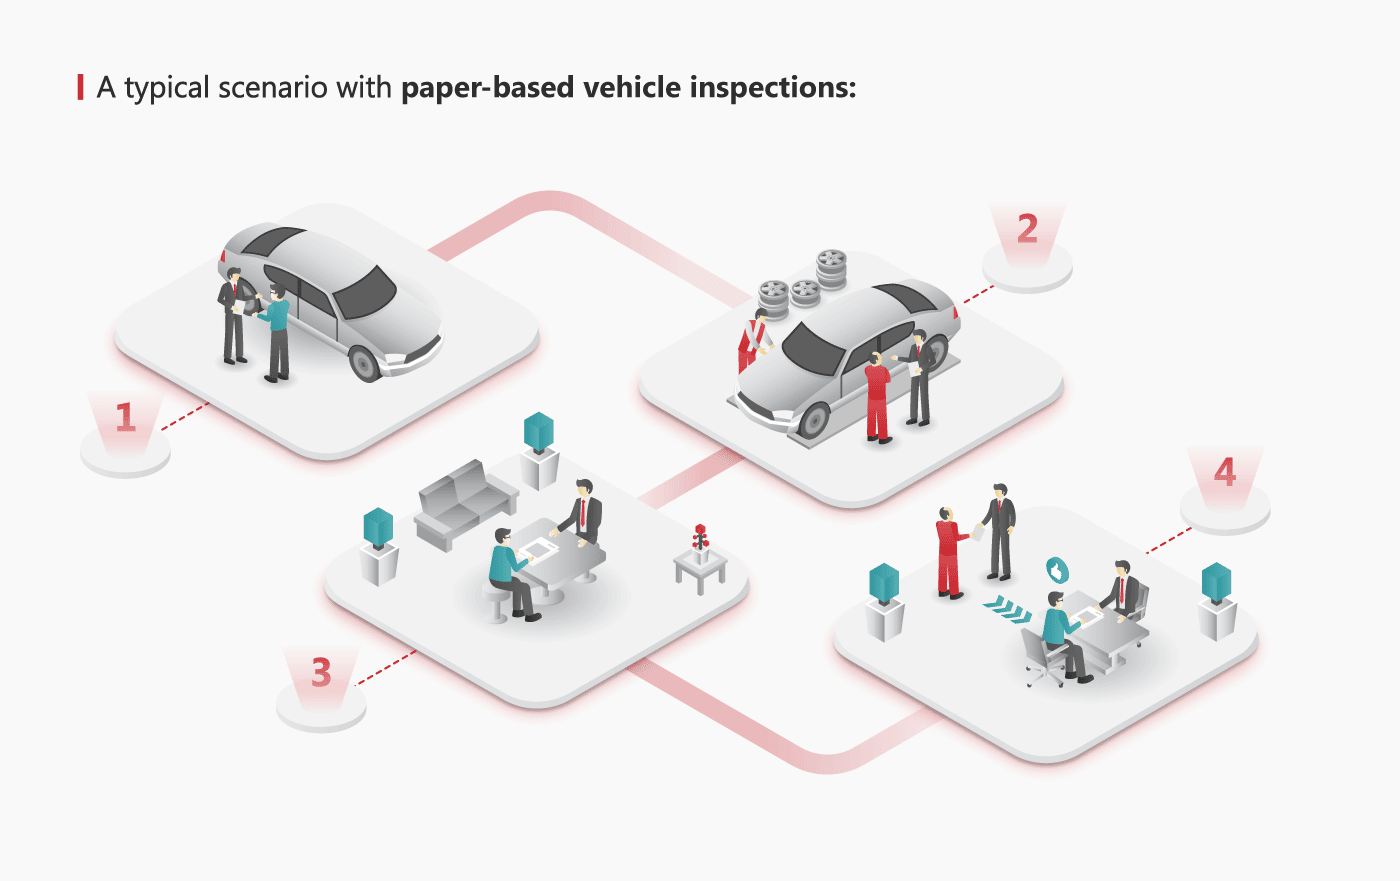 Paper Based Inspections: Digital Vehicle Inspections